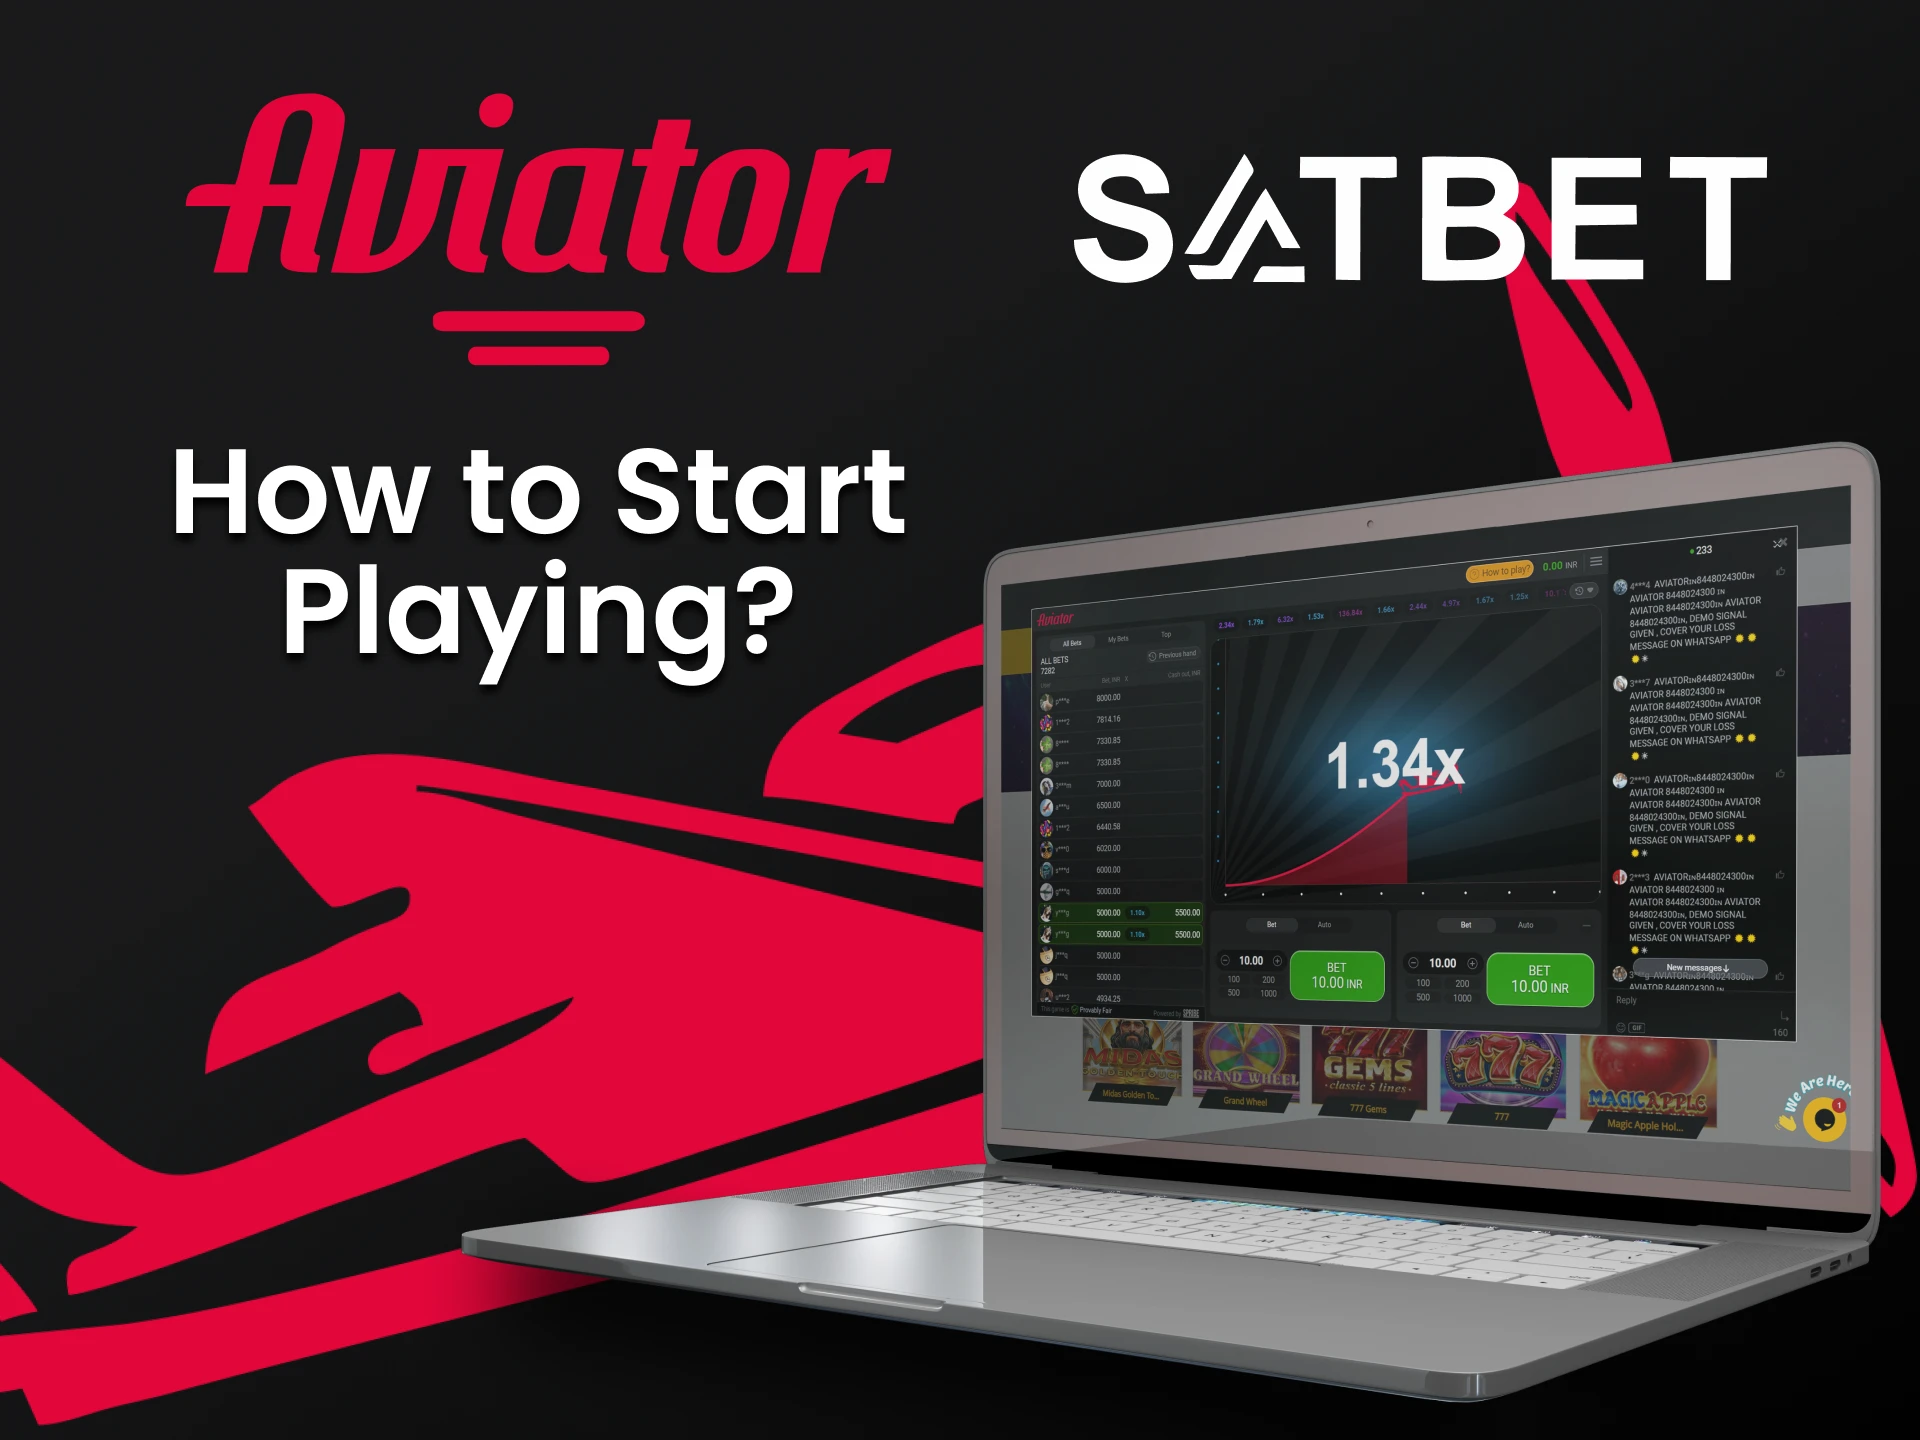 Go to the right section to play Aviator on Satbet.